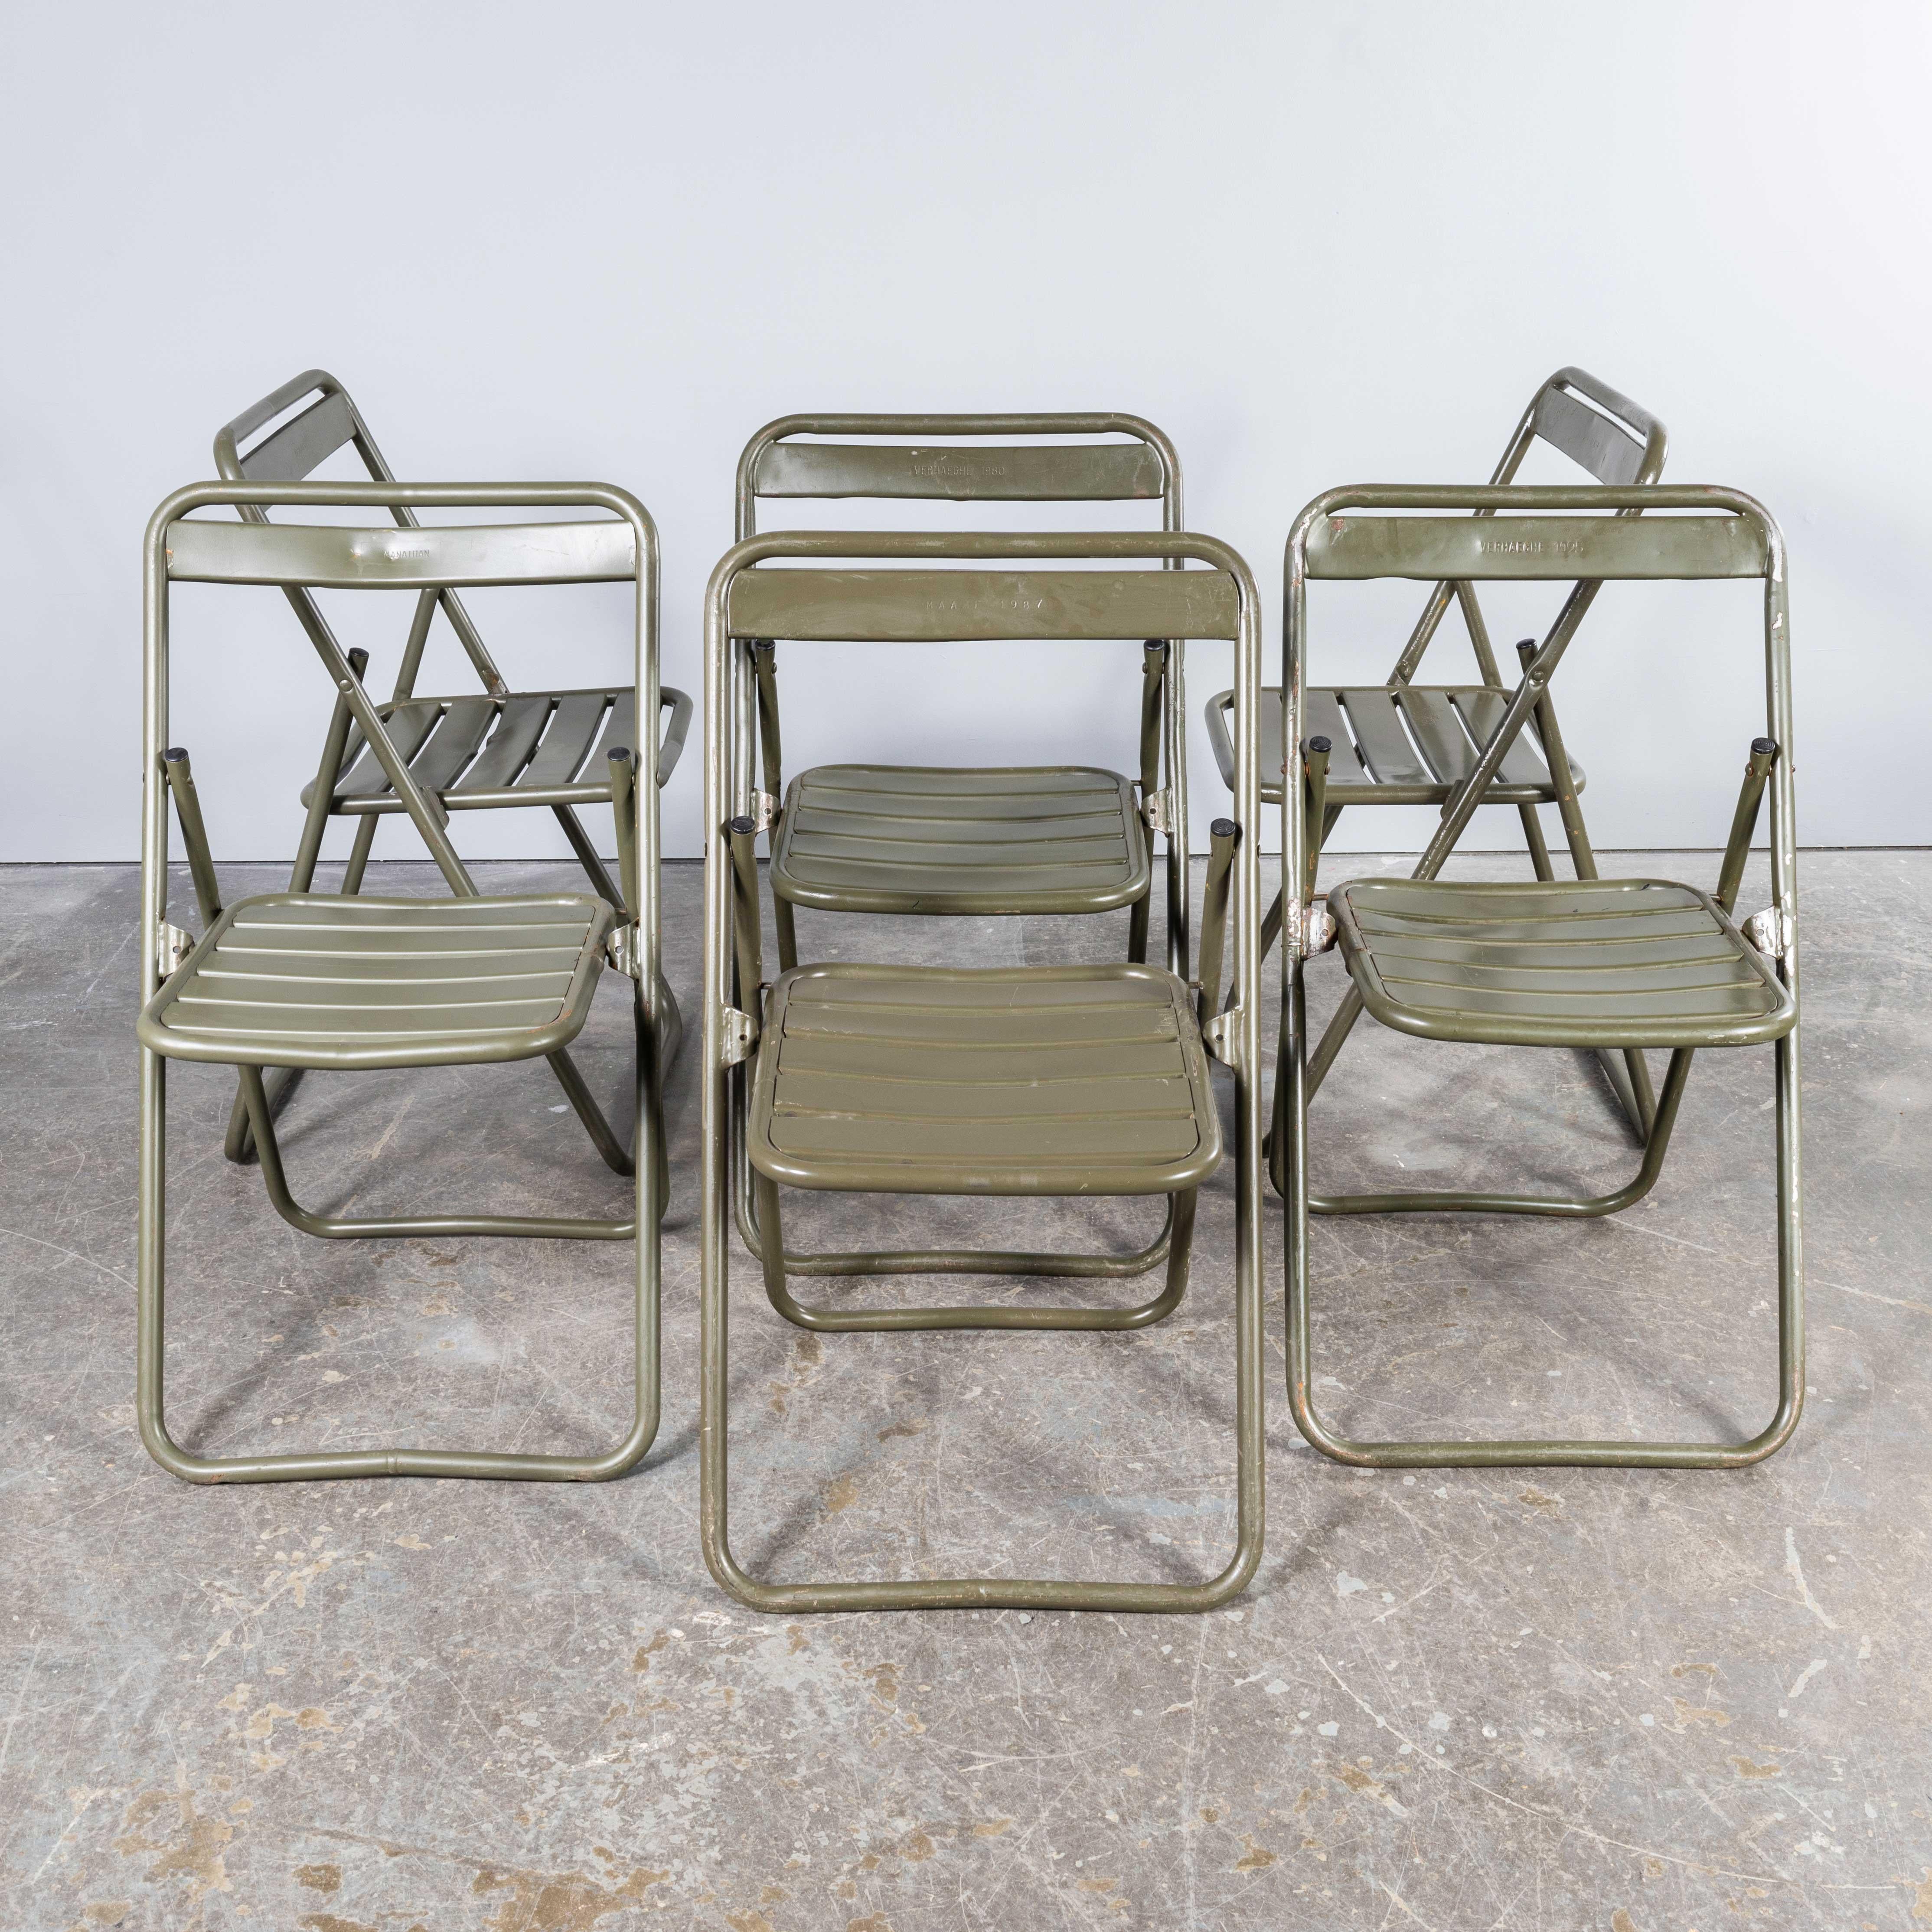 1970's New Old Stock Original French Army Surplus Folding Chairs - Very Large Qu For Sale 3